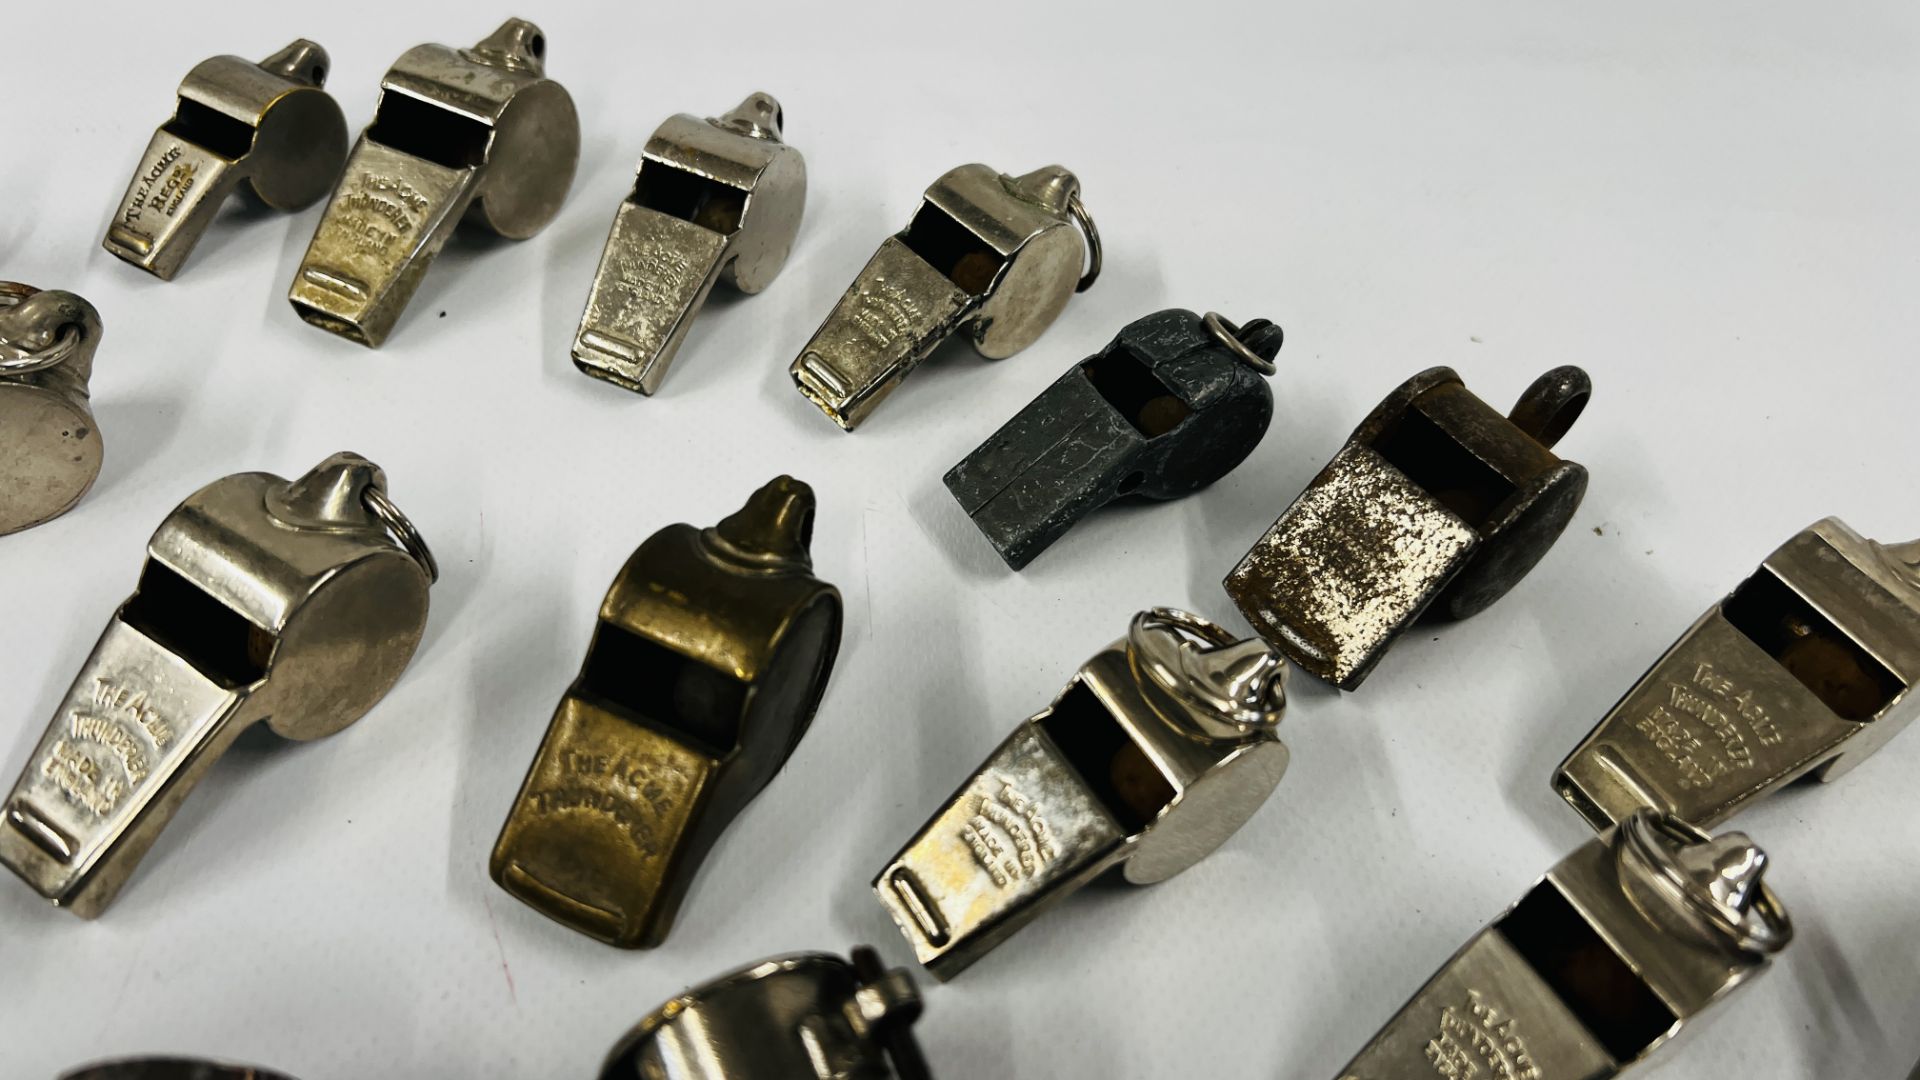 A COLLECTION OF 19 VINTAGE 1900'S - 70'S "ACME" THUNDERERS ESCARGOT WHISTLES. - Image 4 of 7